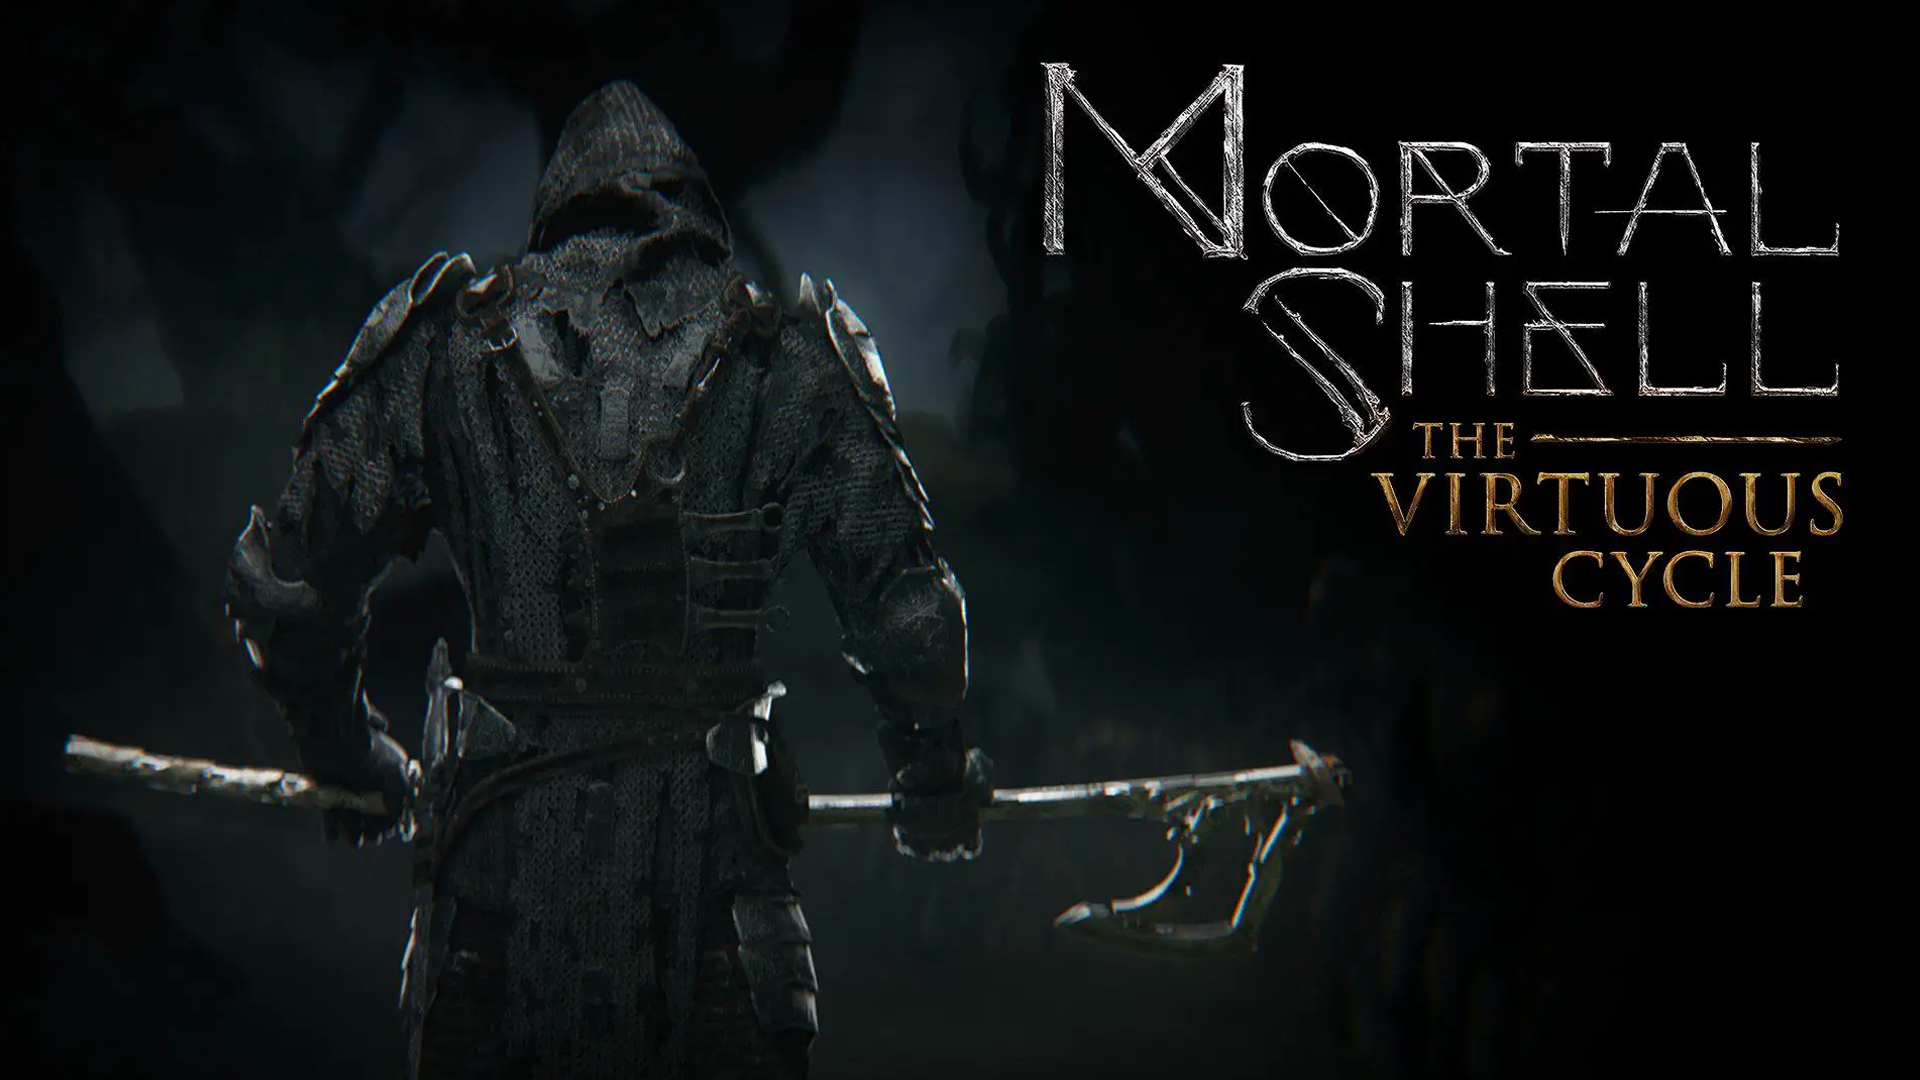 Buy Mortal Shell The Virtuous Cycle Epic Games